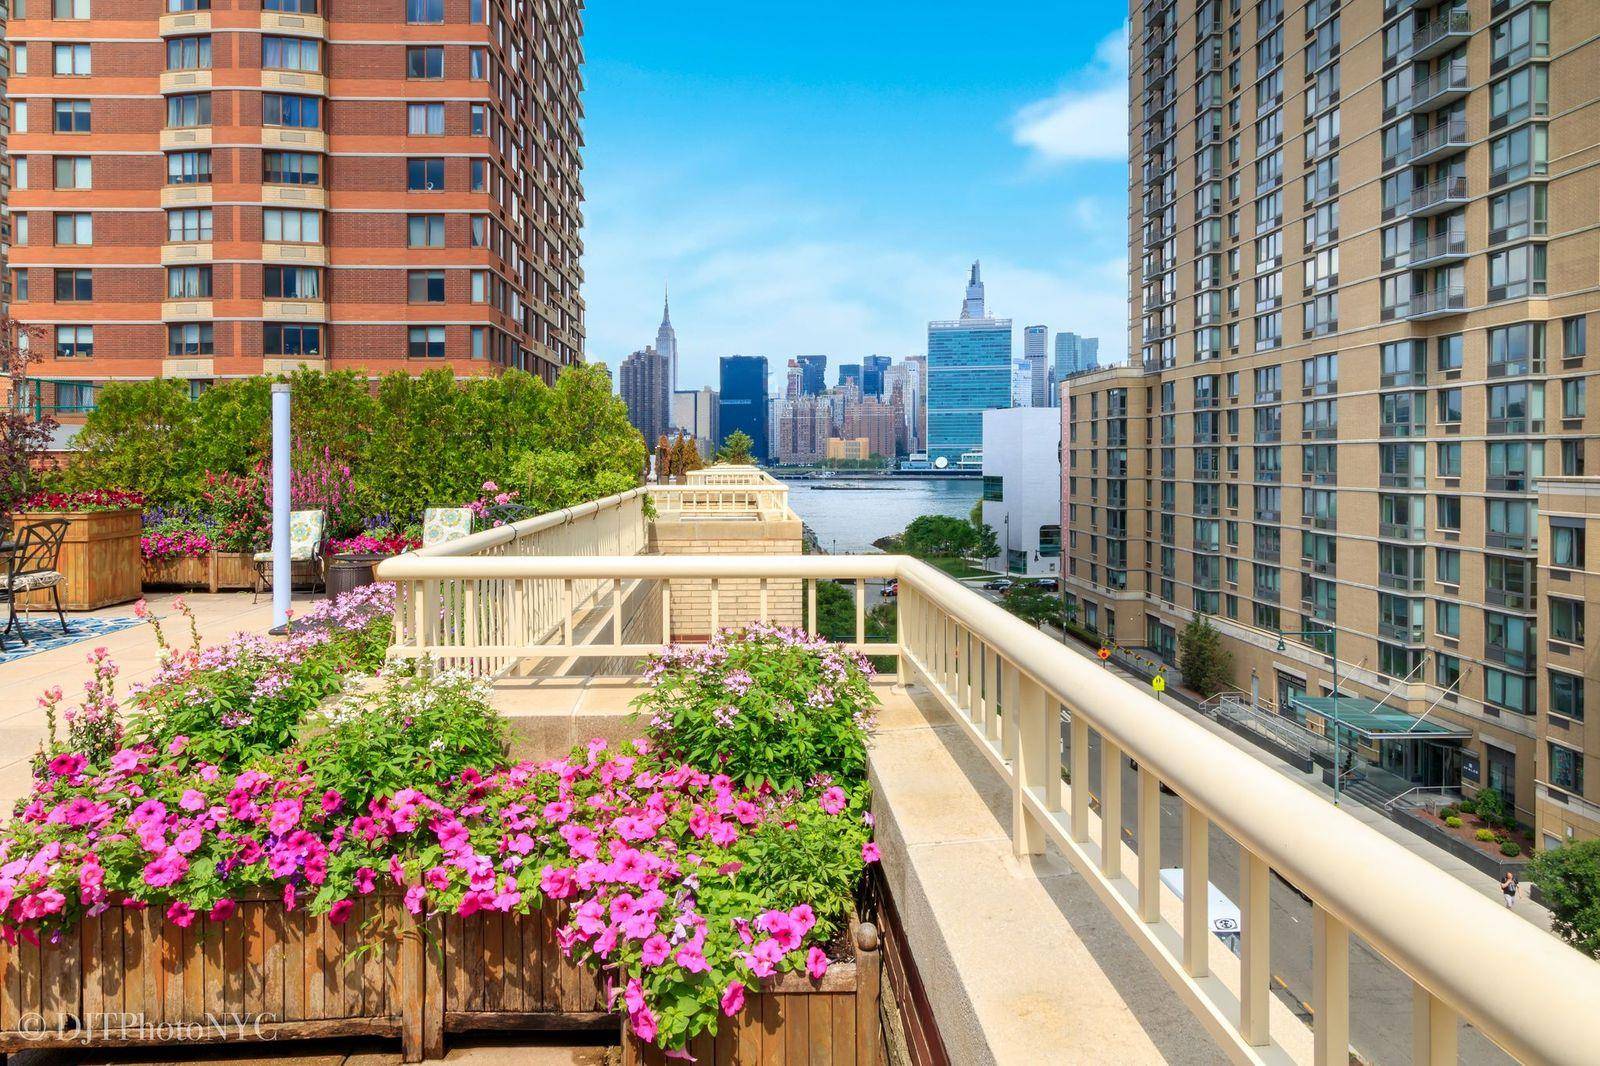 STUNNING DUPLEX 2BR 2BA PRIVATE TERRACE CITY amp ; RIVER VIEWSNYC living doesn't get much better than this, with your very own 1, 000 sq ft outdoor terrace offering supreme ...